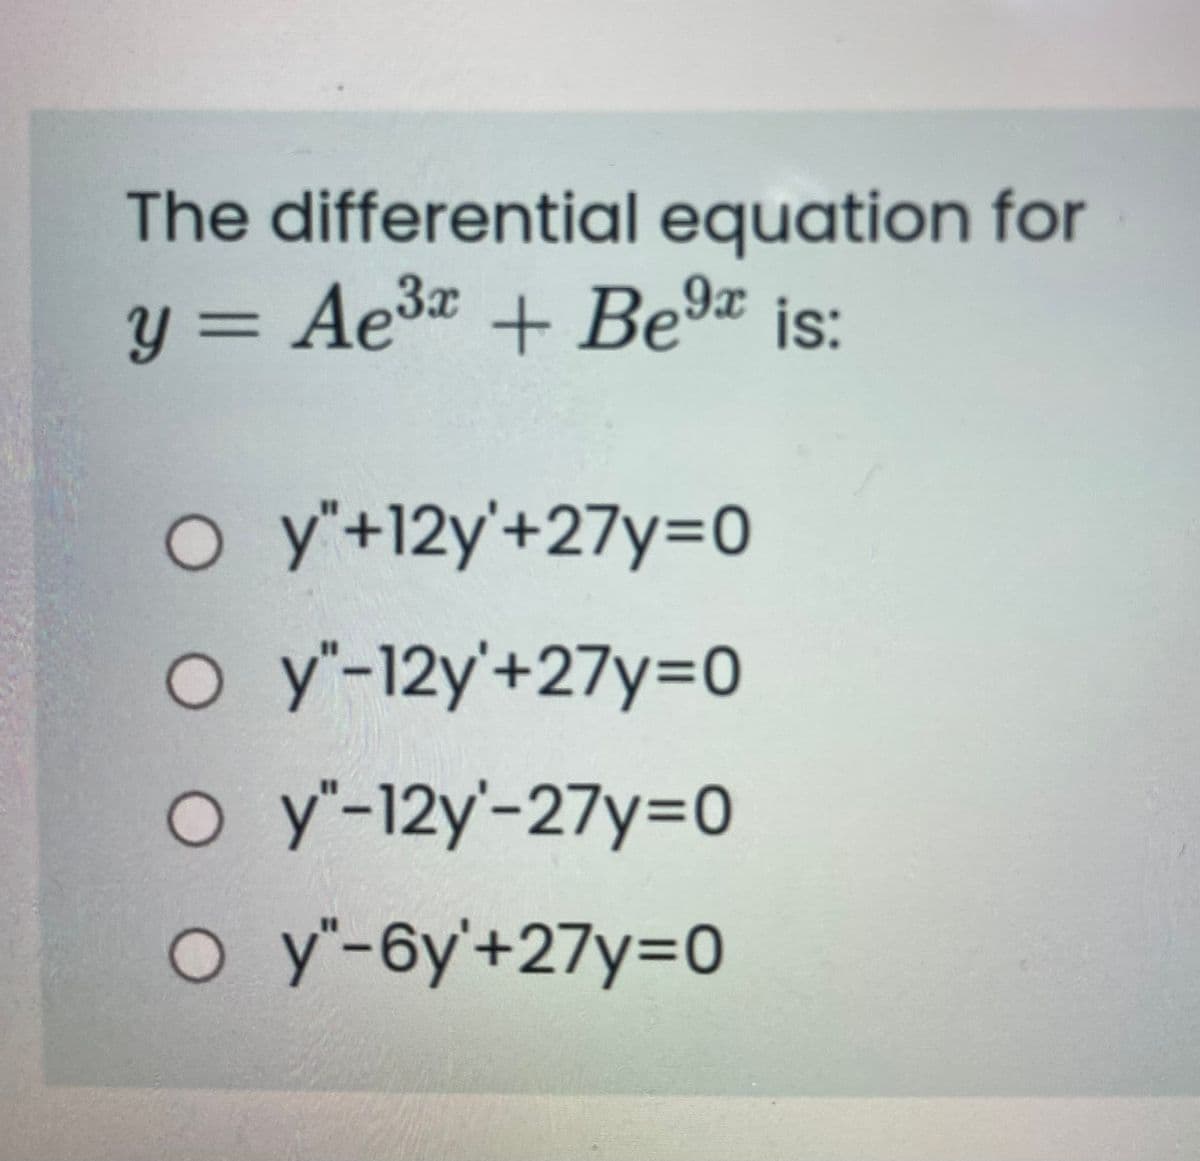 The differential equation for
y = Ae3 + Be9ª is:
%3D
o y'+12y'+27y=0
o y'-12y'+27y=D0
O y"-12y'-27y=0
O y'-6y'+27y=0
